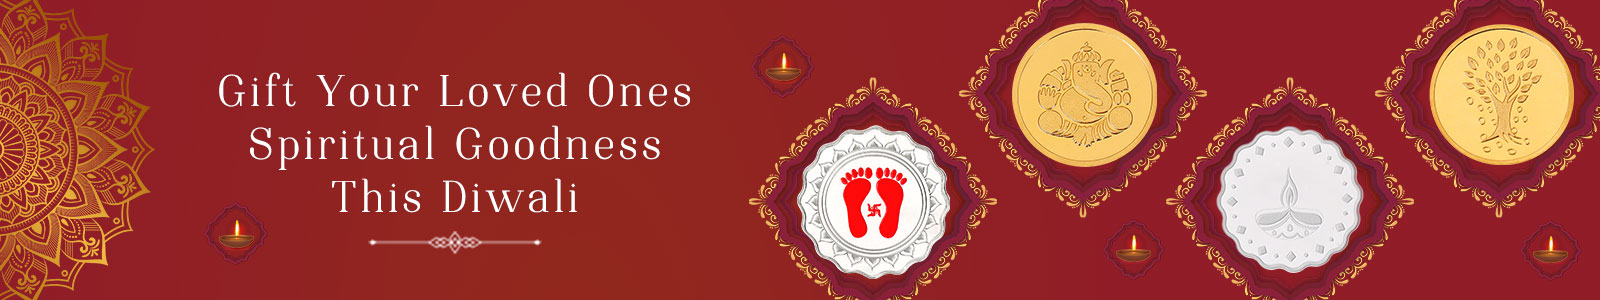 Gift Your Loved Ones Spiritual Goodness This Diwali